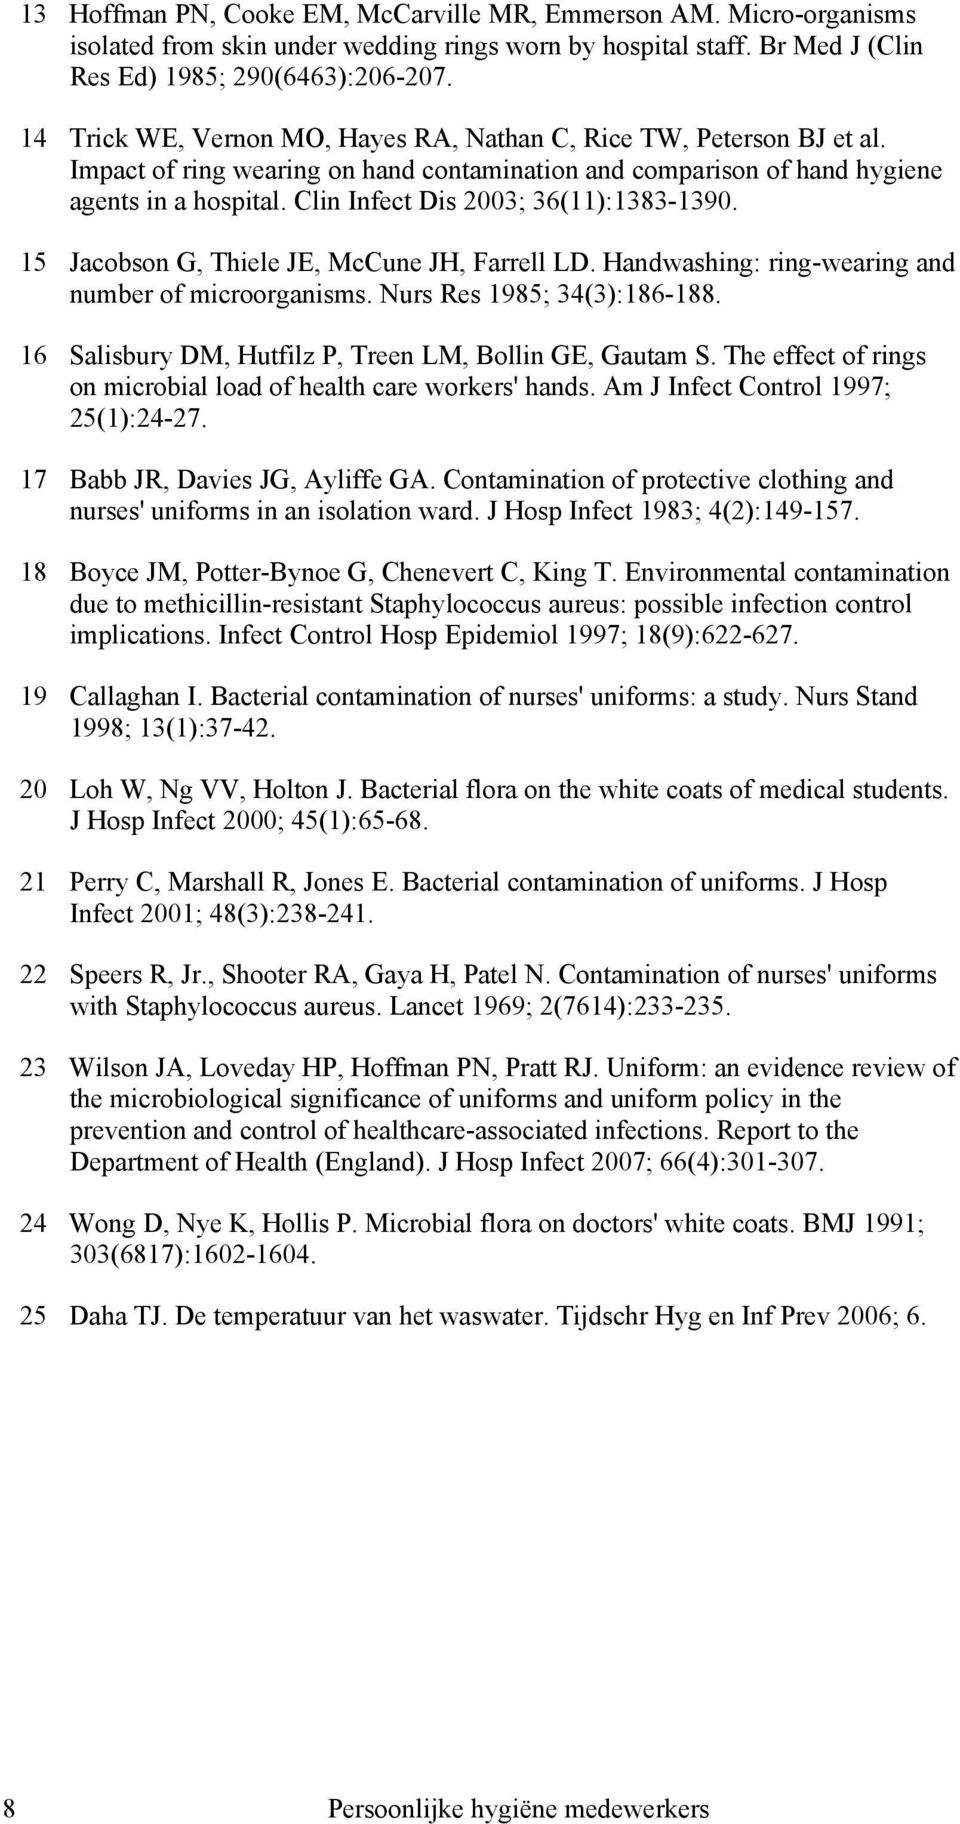 Clin Infect Dis 2003; 36(11):1383-1390. 15 Jacobson G, Thiele JE, McCune JH, Farrell LD. Handwashing: ring-wearing and number of microorganisms. Nurs Res 1985; 34(3):186-188.